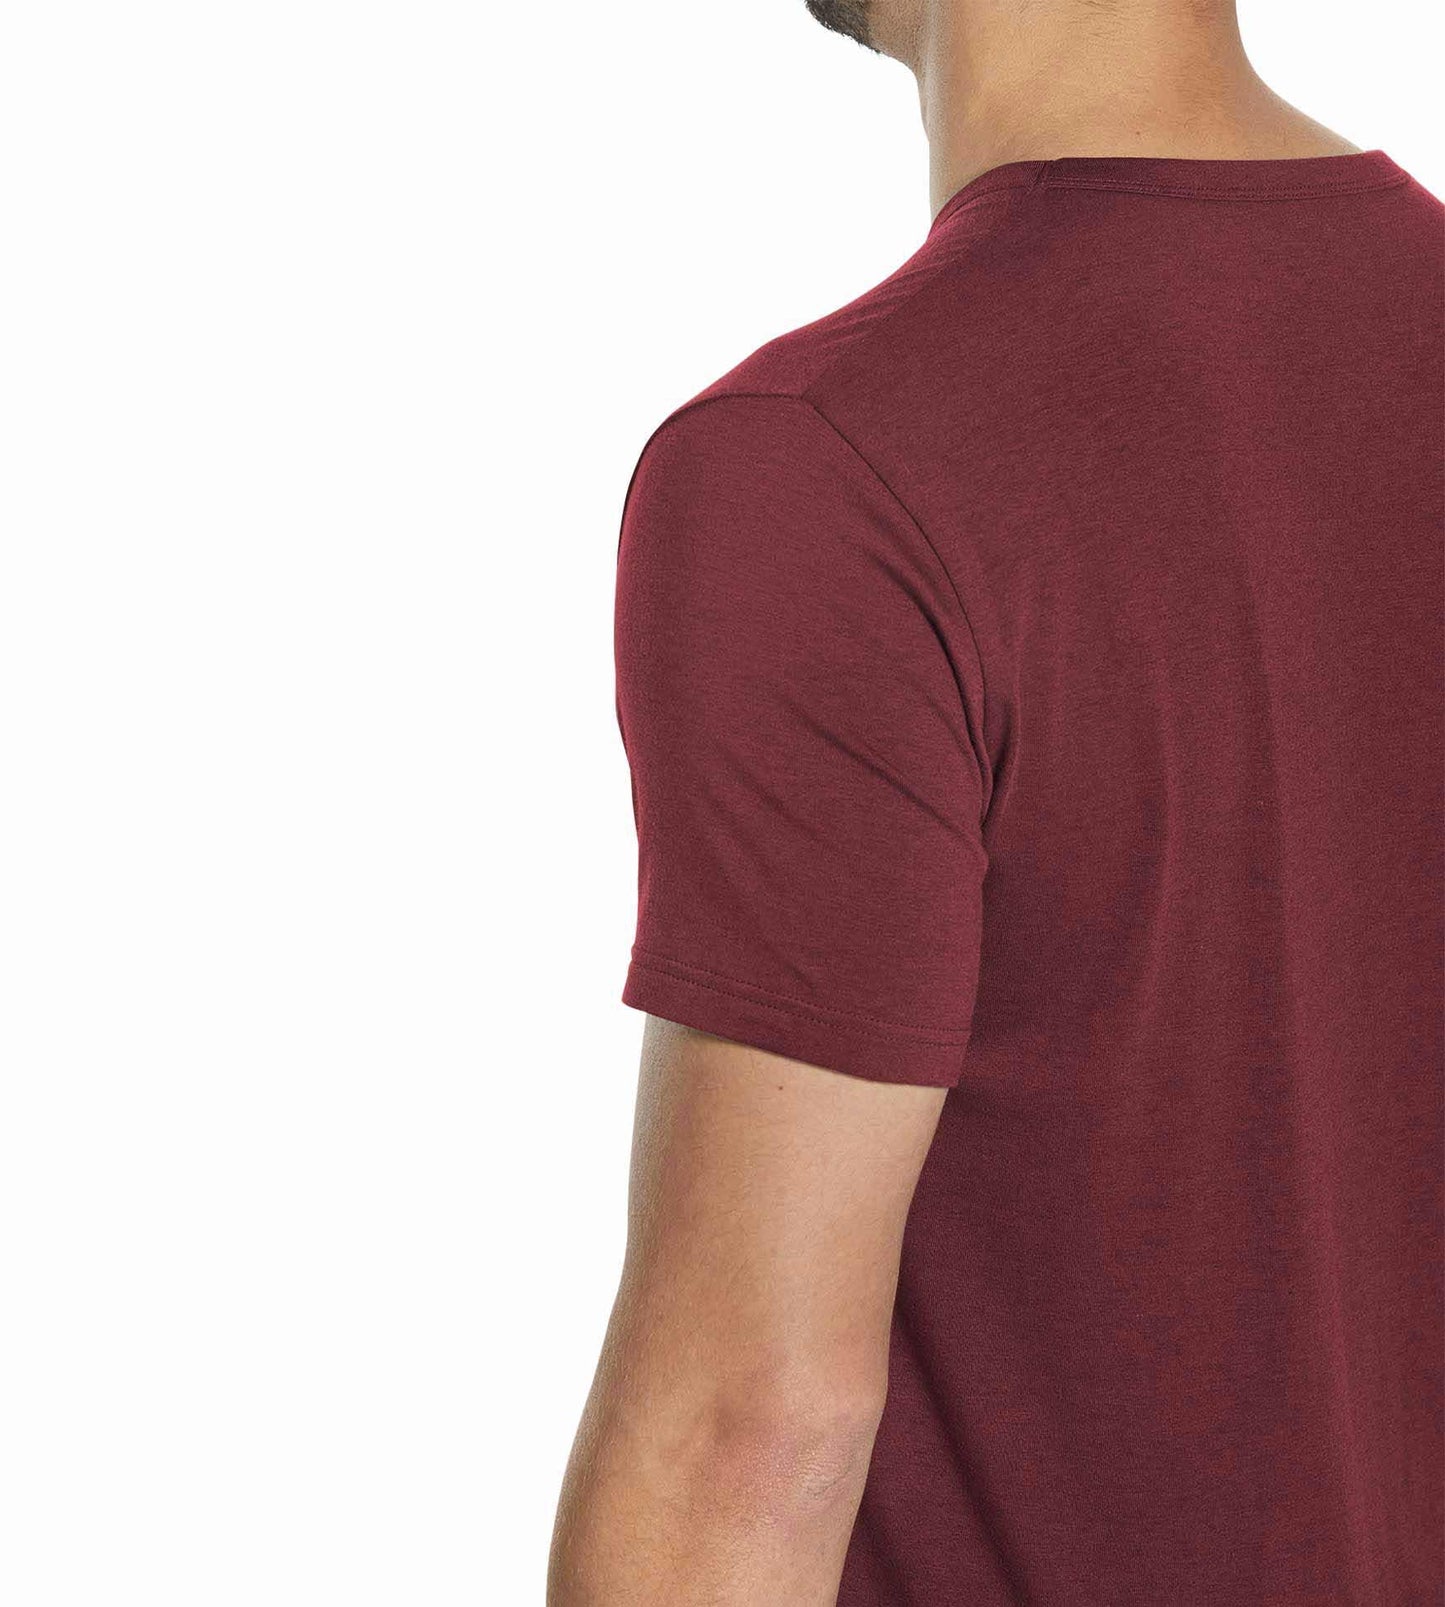 SuperSoft Crew Neck Pocket Tee colors contain: Saddle brown, Snow, Rosy brown, Sienna, Saddle brown, Maroon, Rosy brown, Sienna, Tan, Saddle brown